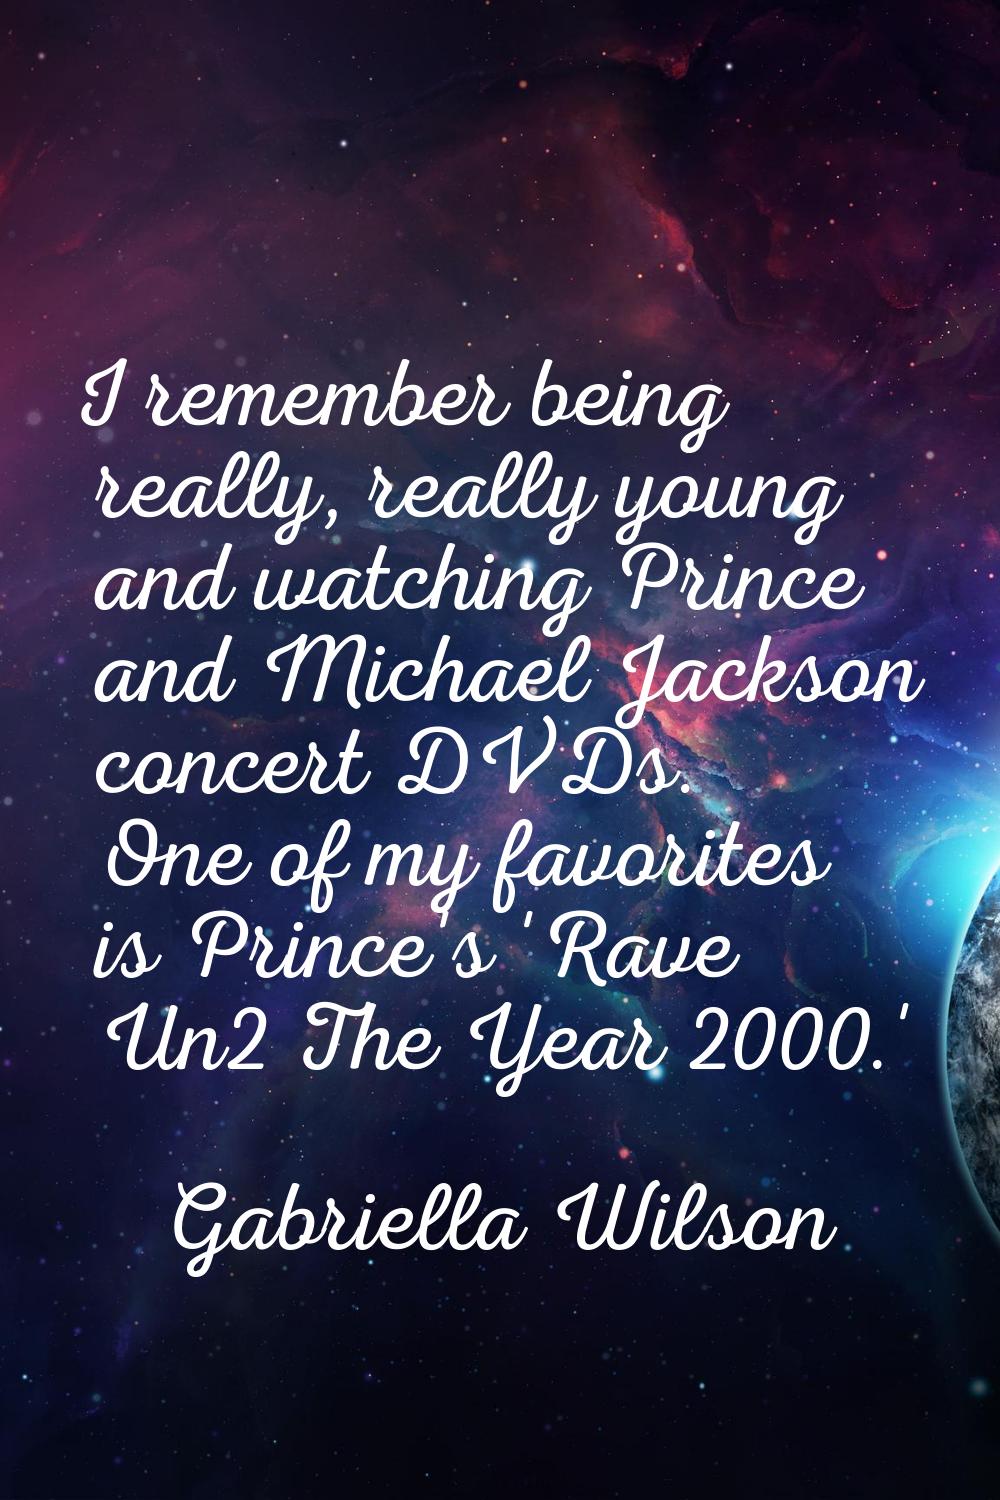 I remember being really, really young and watching Prince and Michael Jackson concert DVDs. One of 